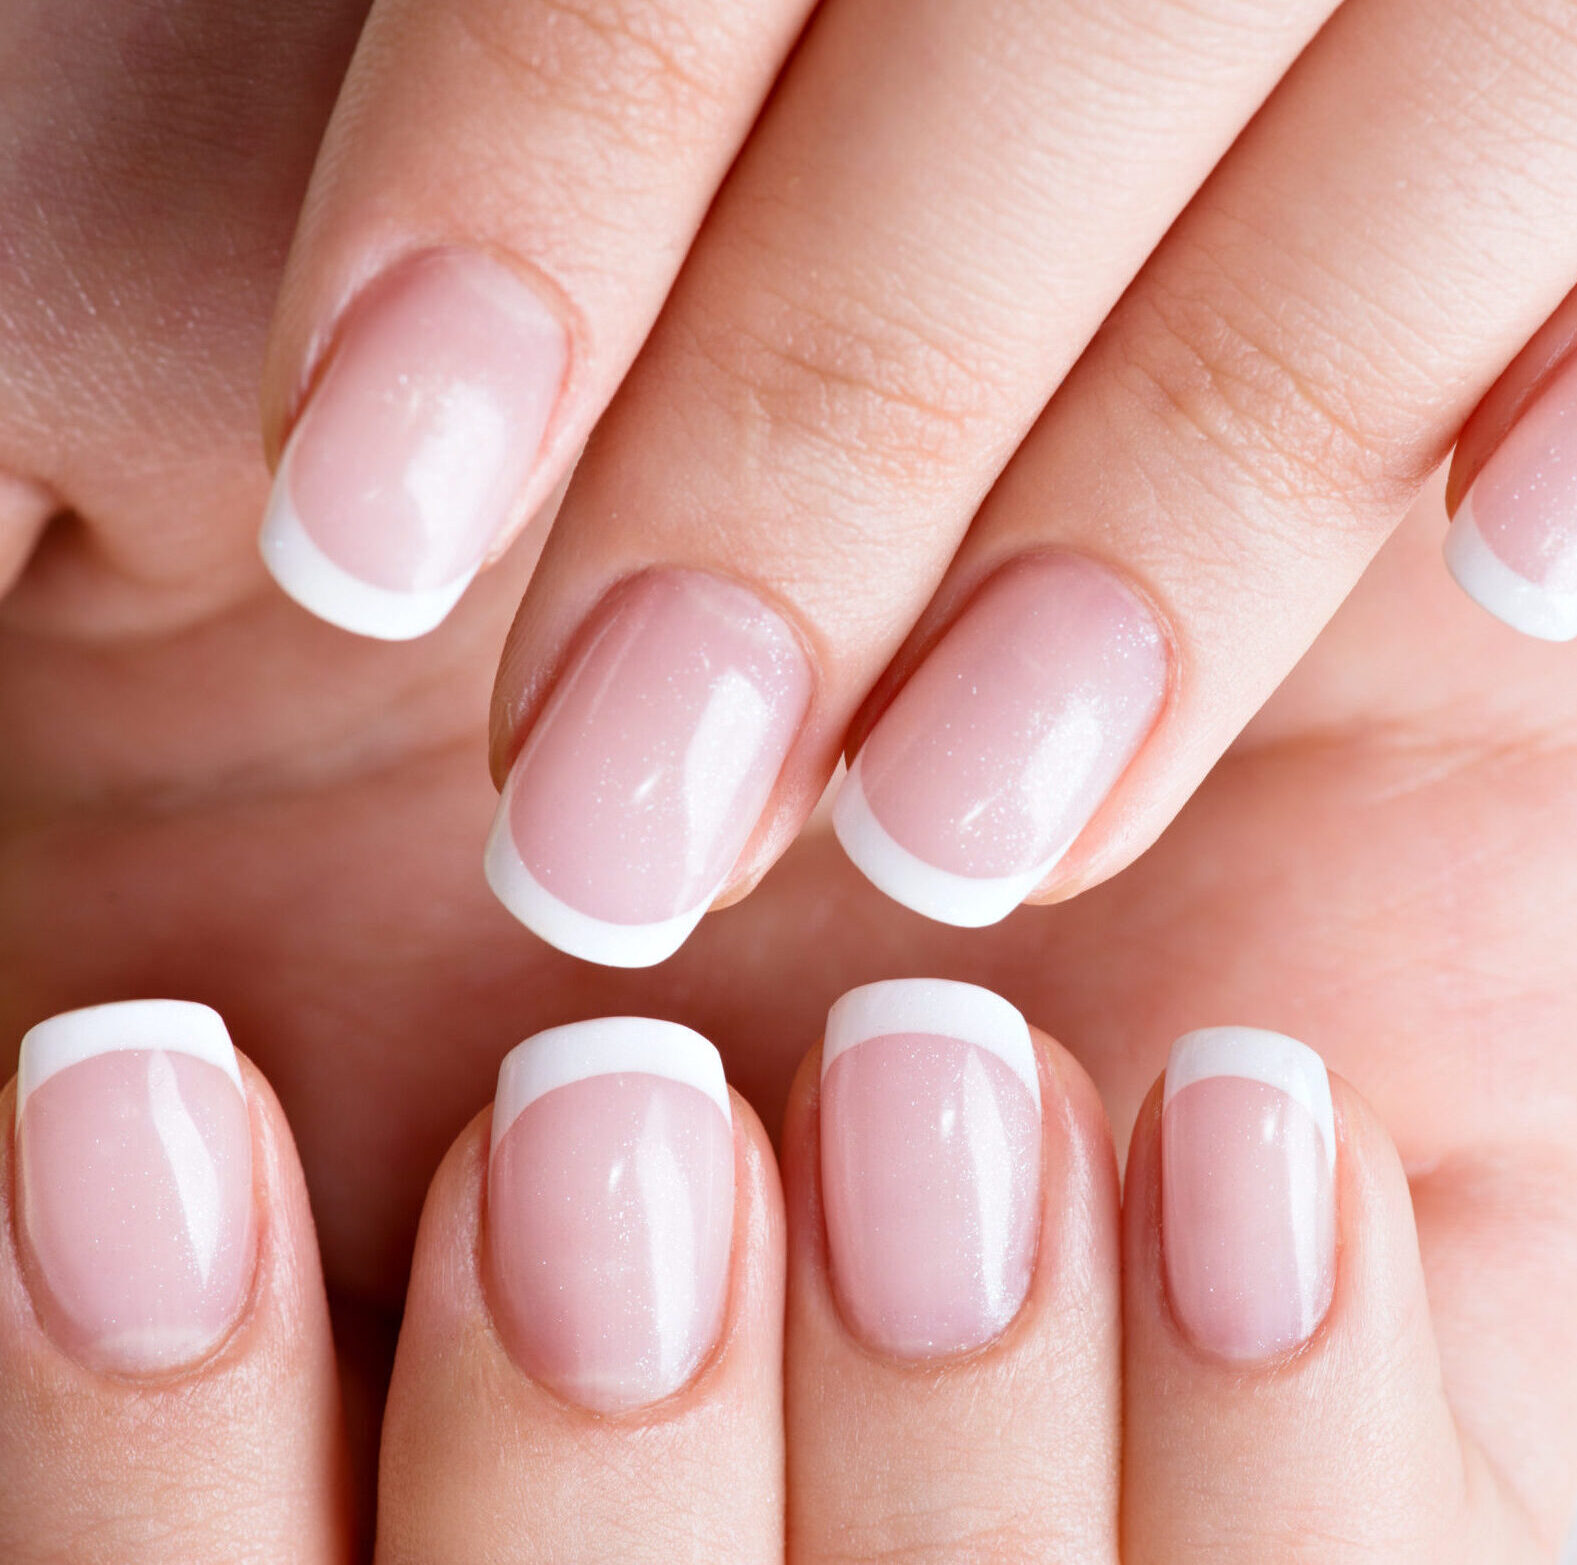 5 Ways to Dry Your Nails | Nailpro